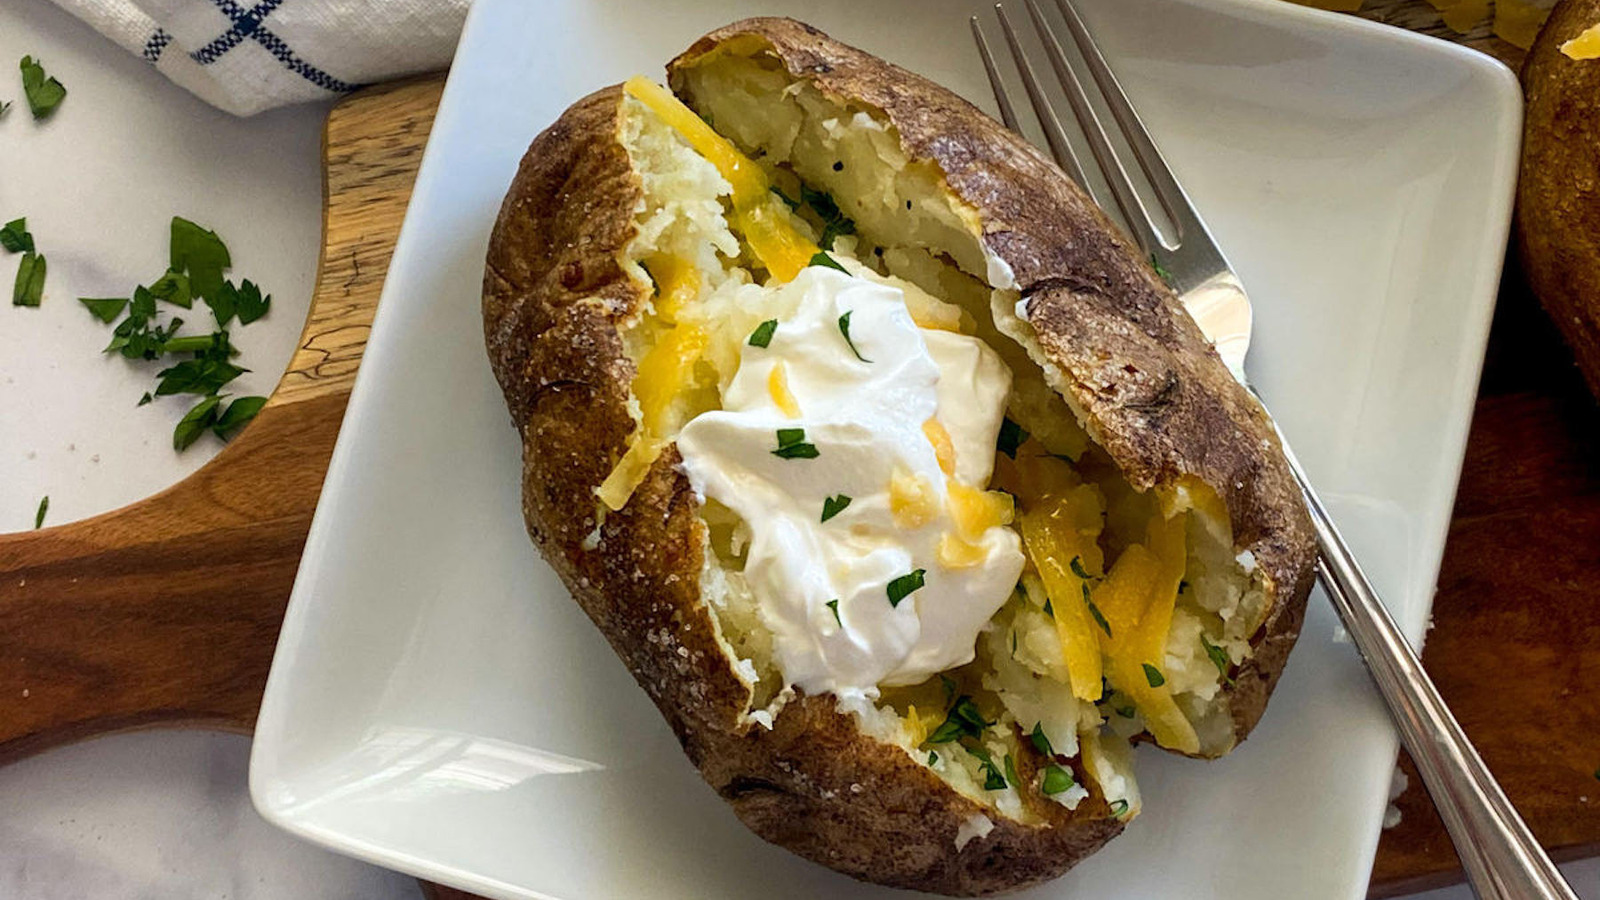 https://www.mashed.com/img/gallery/best-air-fryer-baked-potato-recipe/l-intro-1626139499.jpg